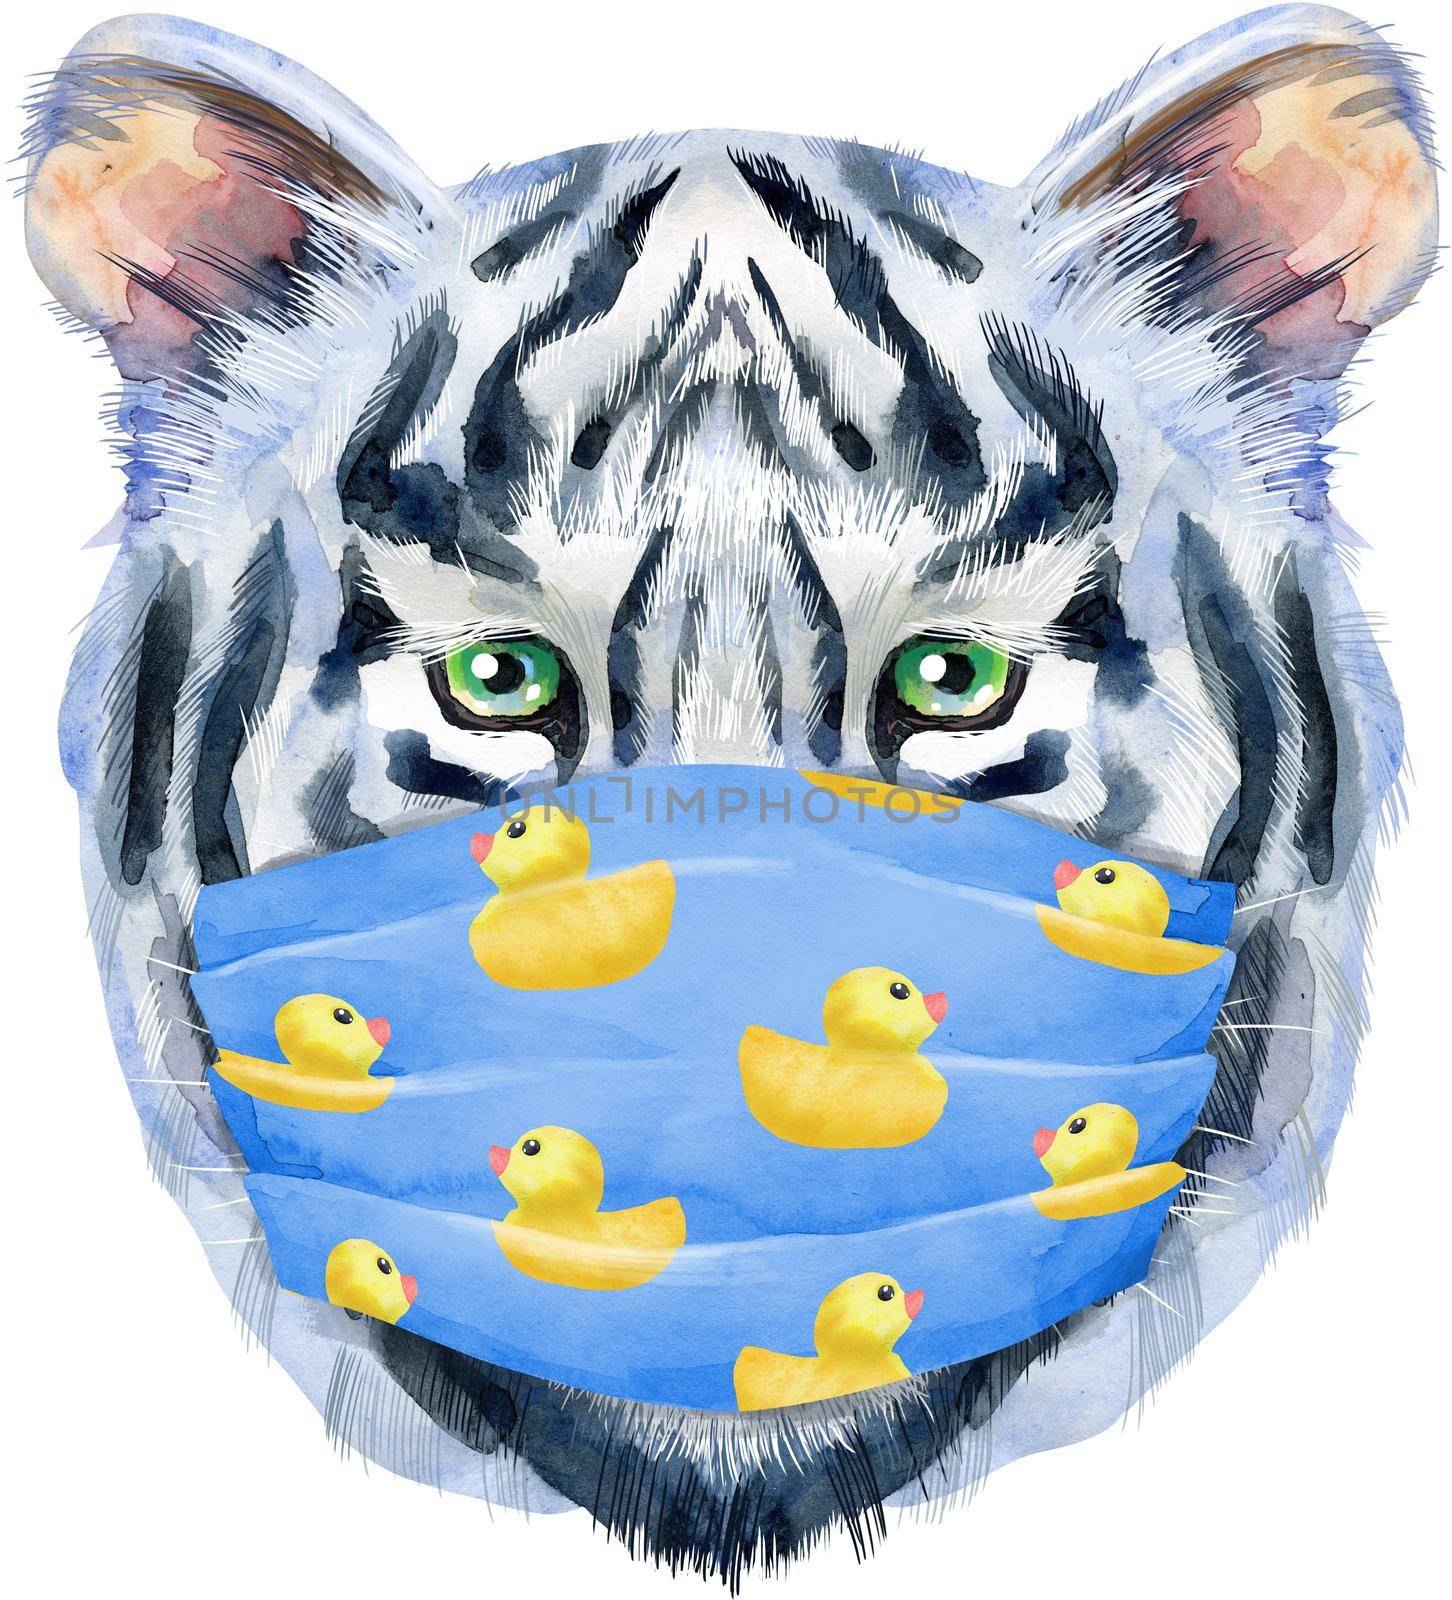 Watercolor illustration of white smiling tiger tiger in a blue medical mask with ducks